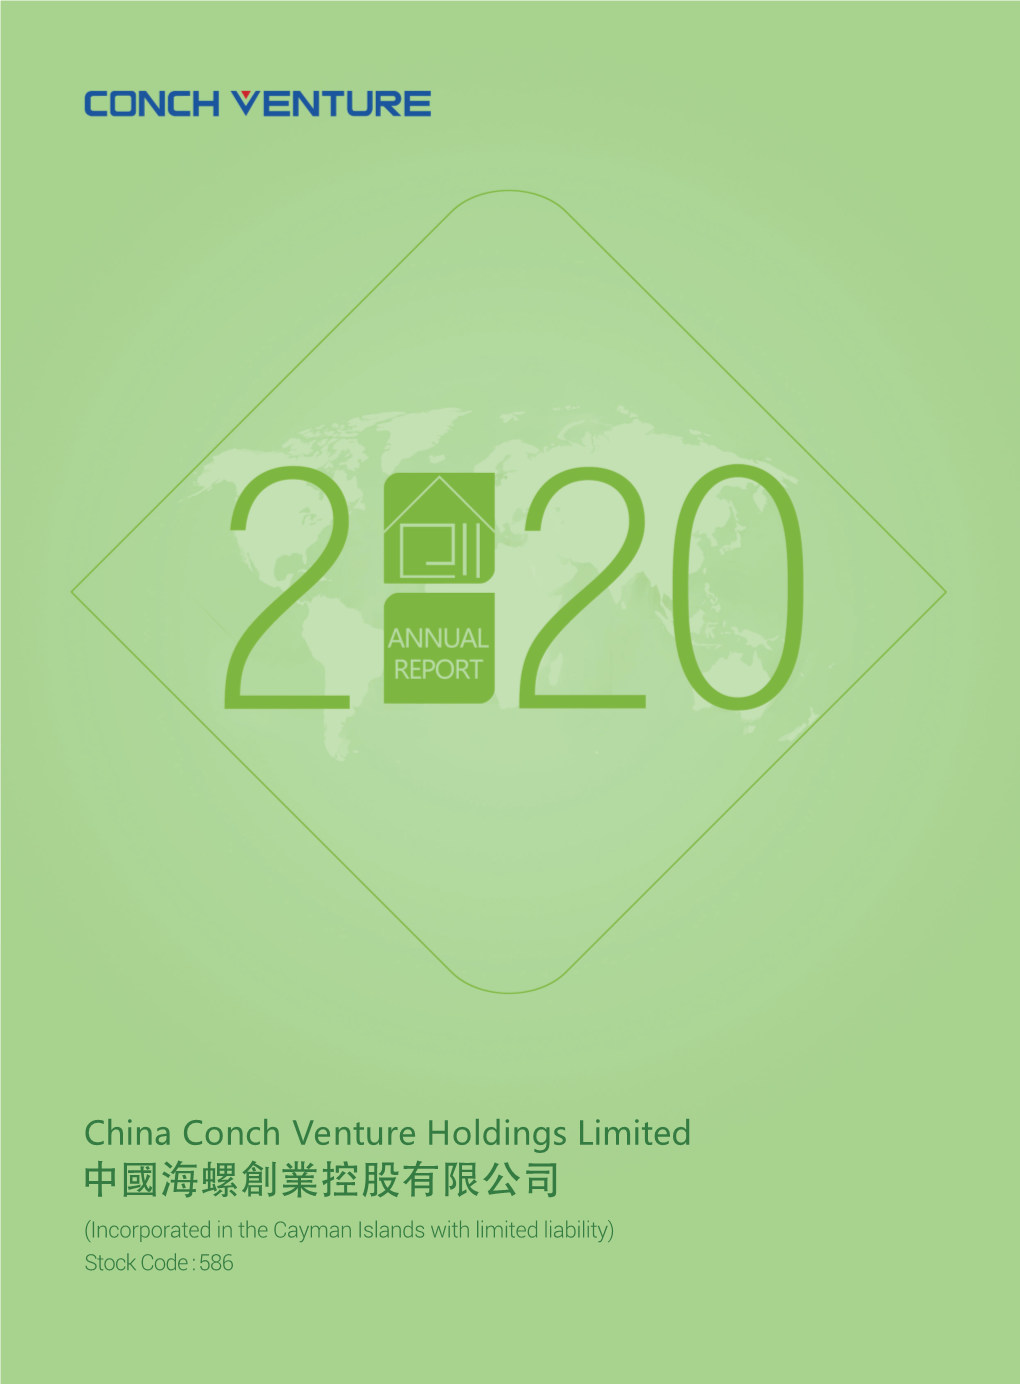 Annual Report, in Both Chinese and English Versions, Is Available on the Company’S Website at (The “Company Website”)